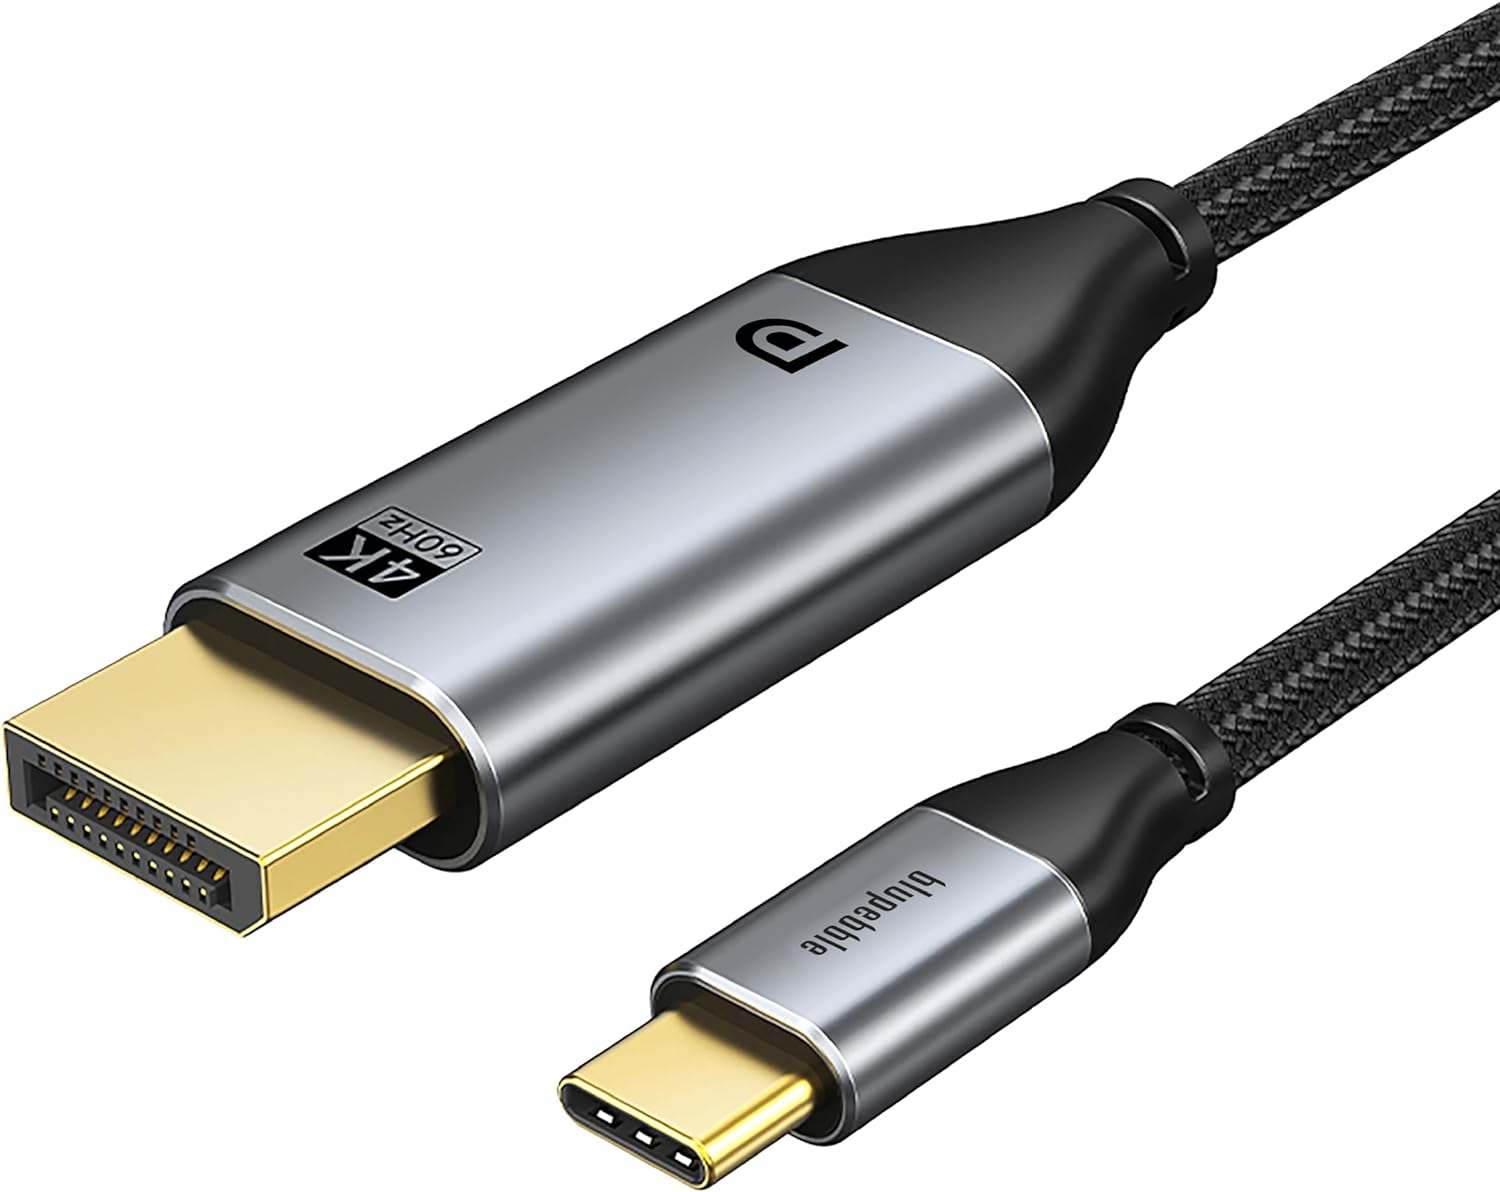 Blupebble 4K USB C to DisplayPort Cable Type C Thunderbolt 3/4 to DP Cable 4K@140HZ/120HZ, Compatible for iPhone 15 Series, Macbook Pro/Air, Galaxy S23/23+,iPad Pro/Air/Mini, Dell XPS - 3 Metre